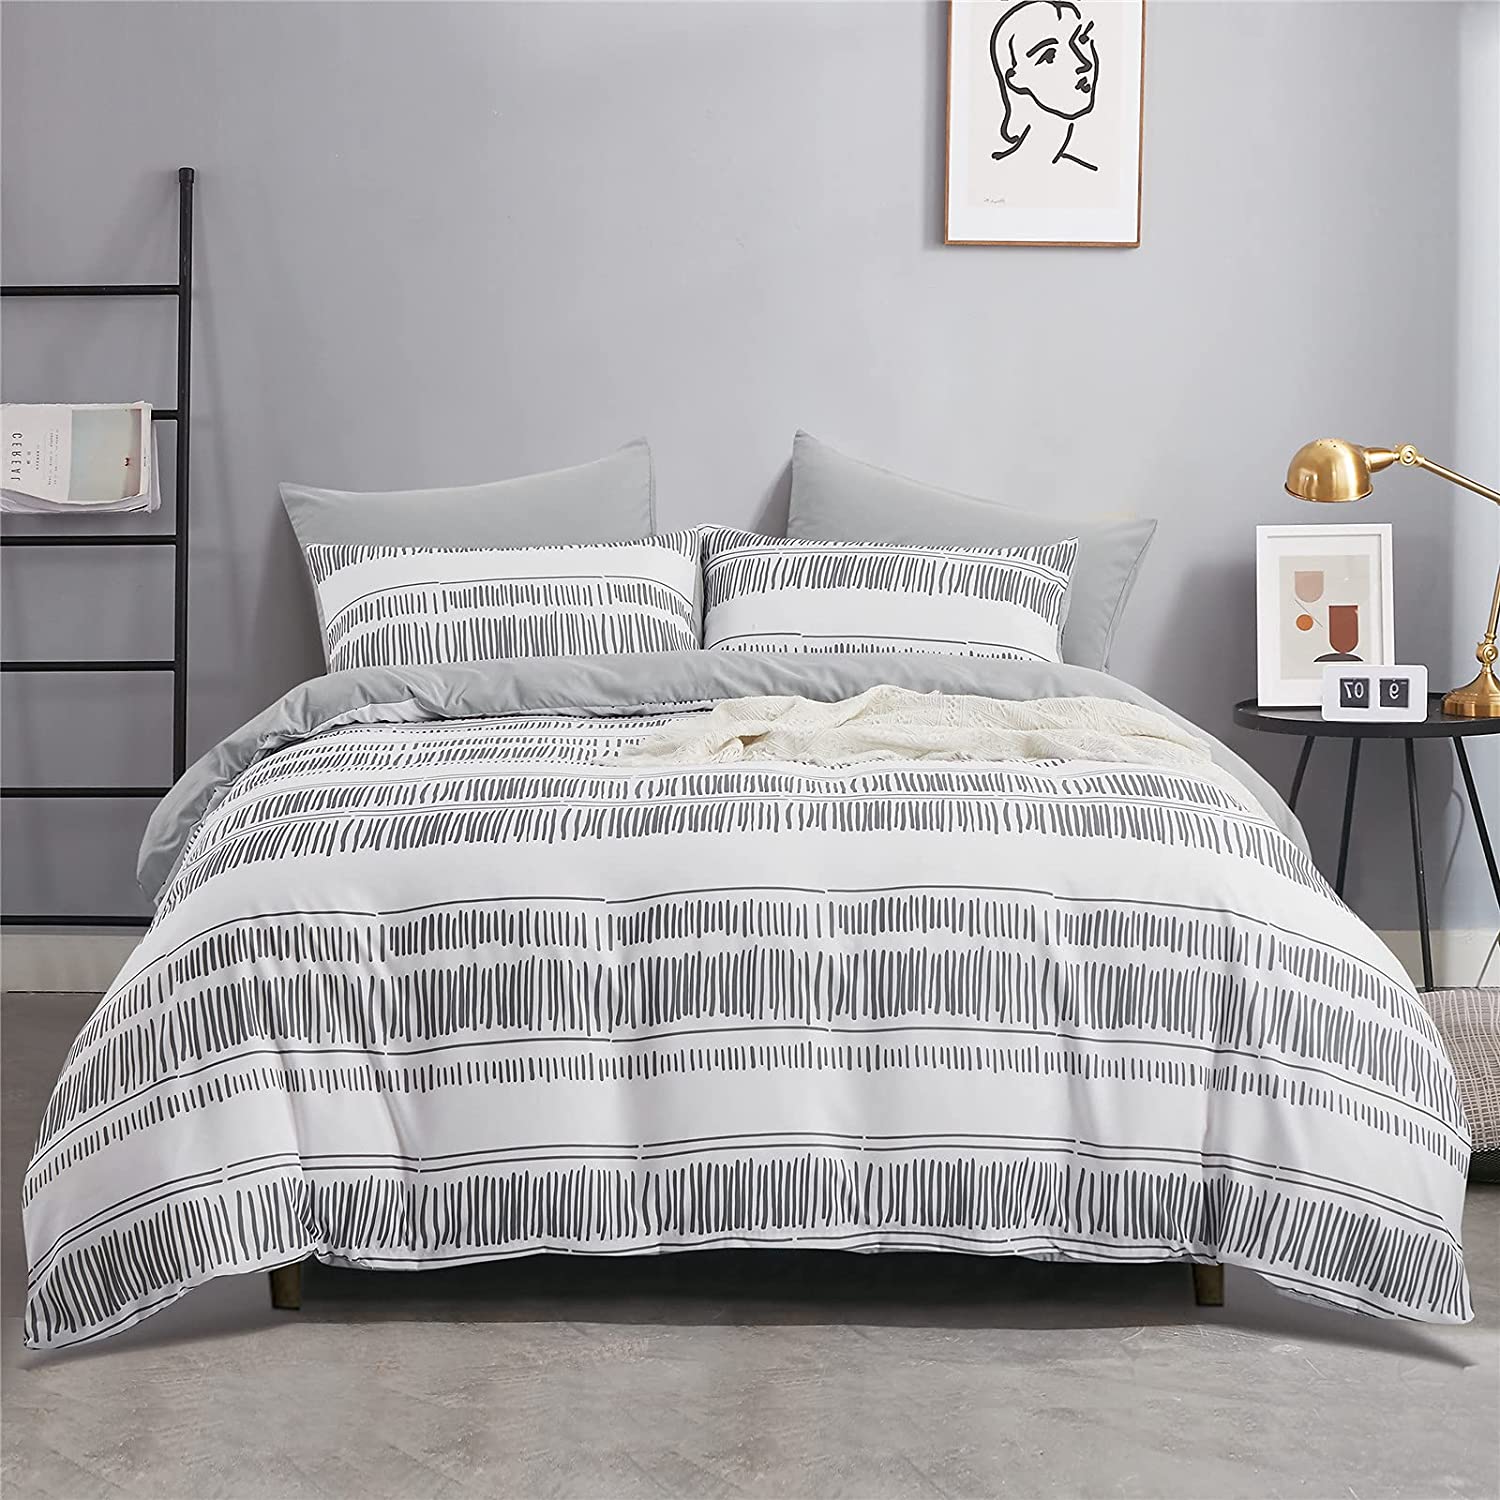 Price:$28.99  Grey Striped Duvet Cover Set Queen, Geometric Pattern Print White Duvet Cover, Soft Microfiber Comforter Cover with Zipper Closure and Corner Ties(Stripe, Queen) : Home & Kitchen